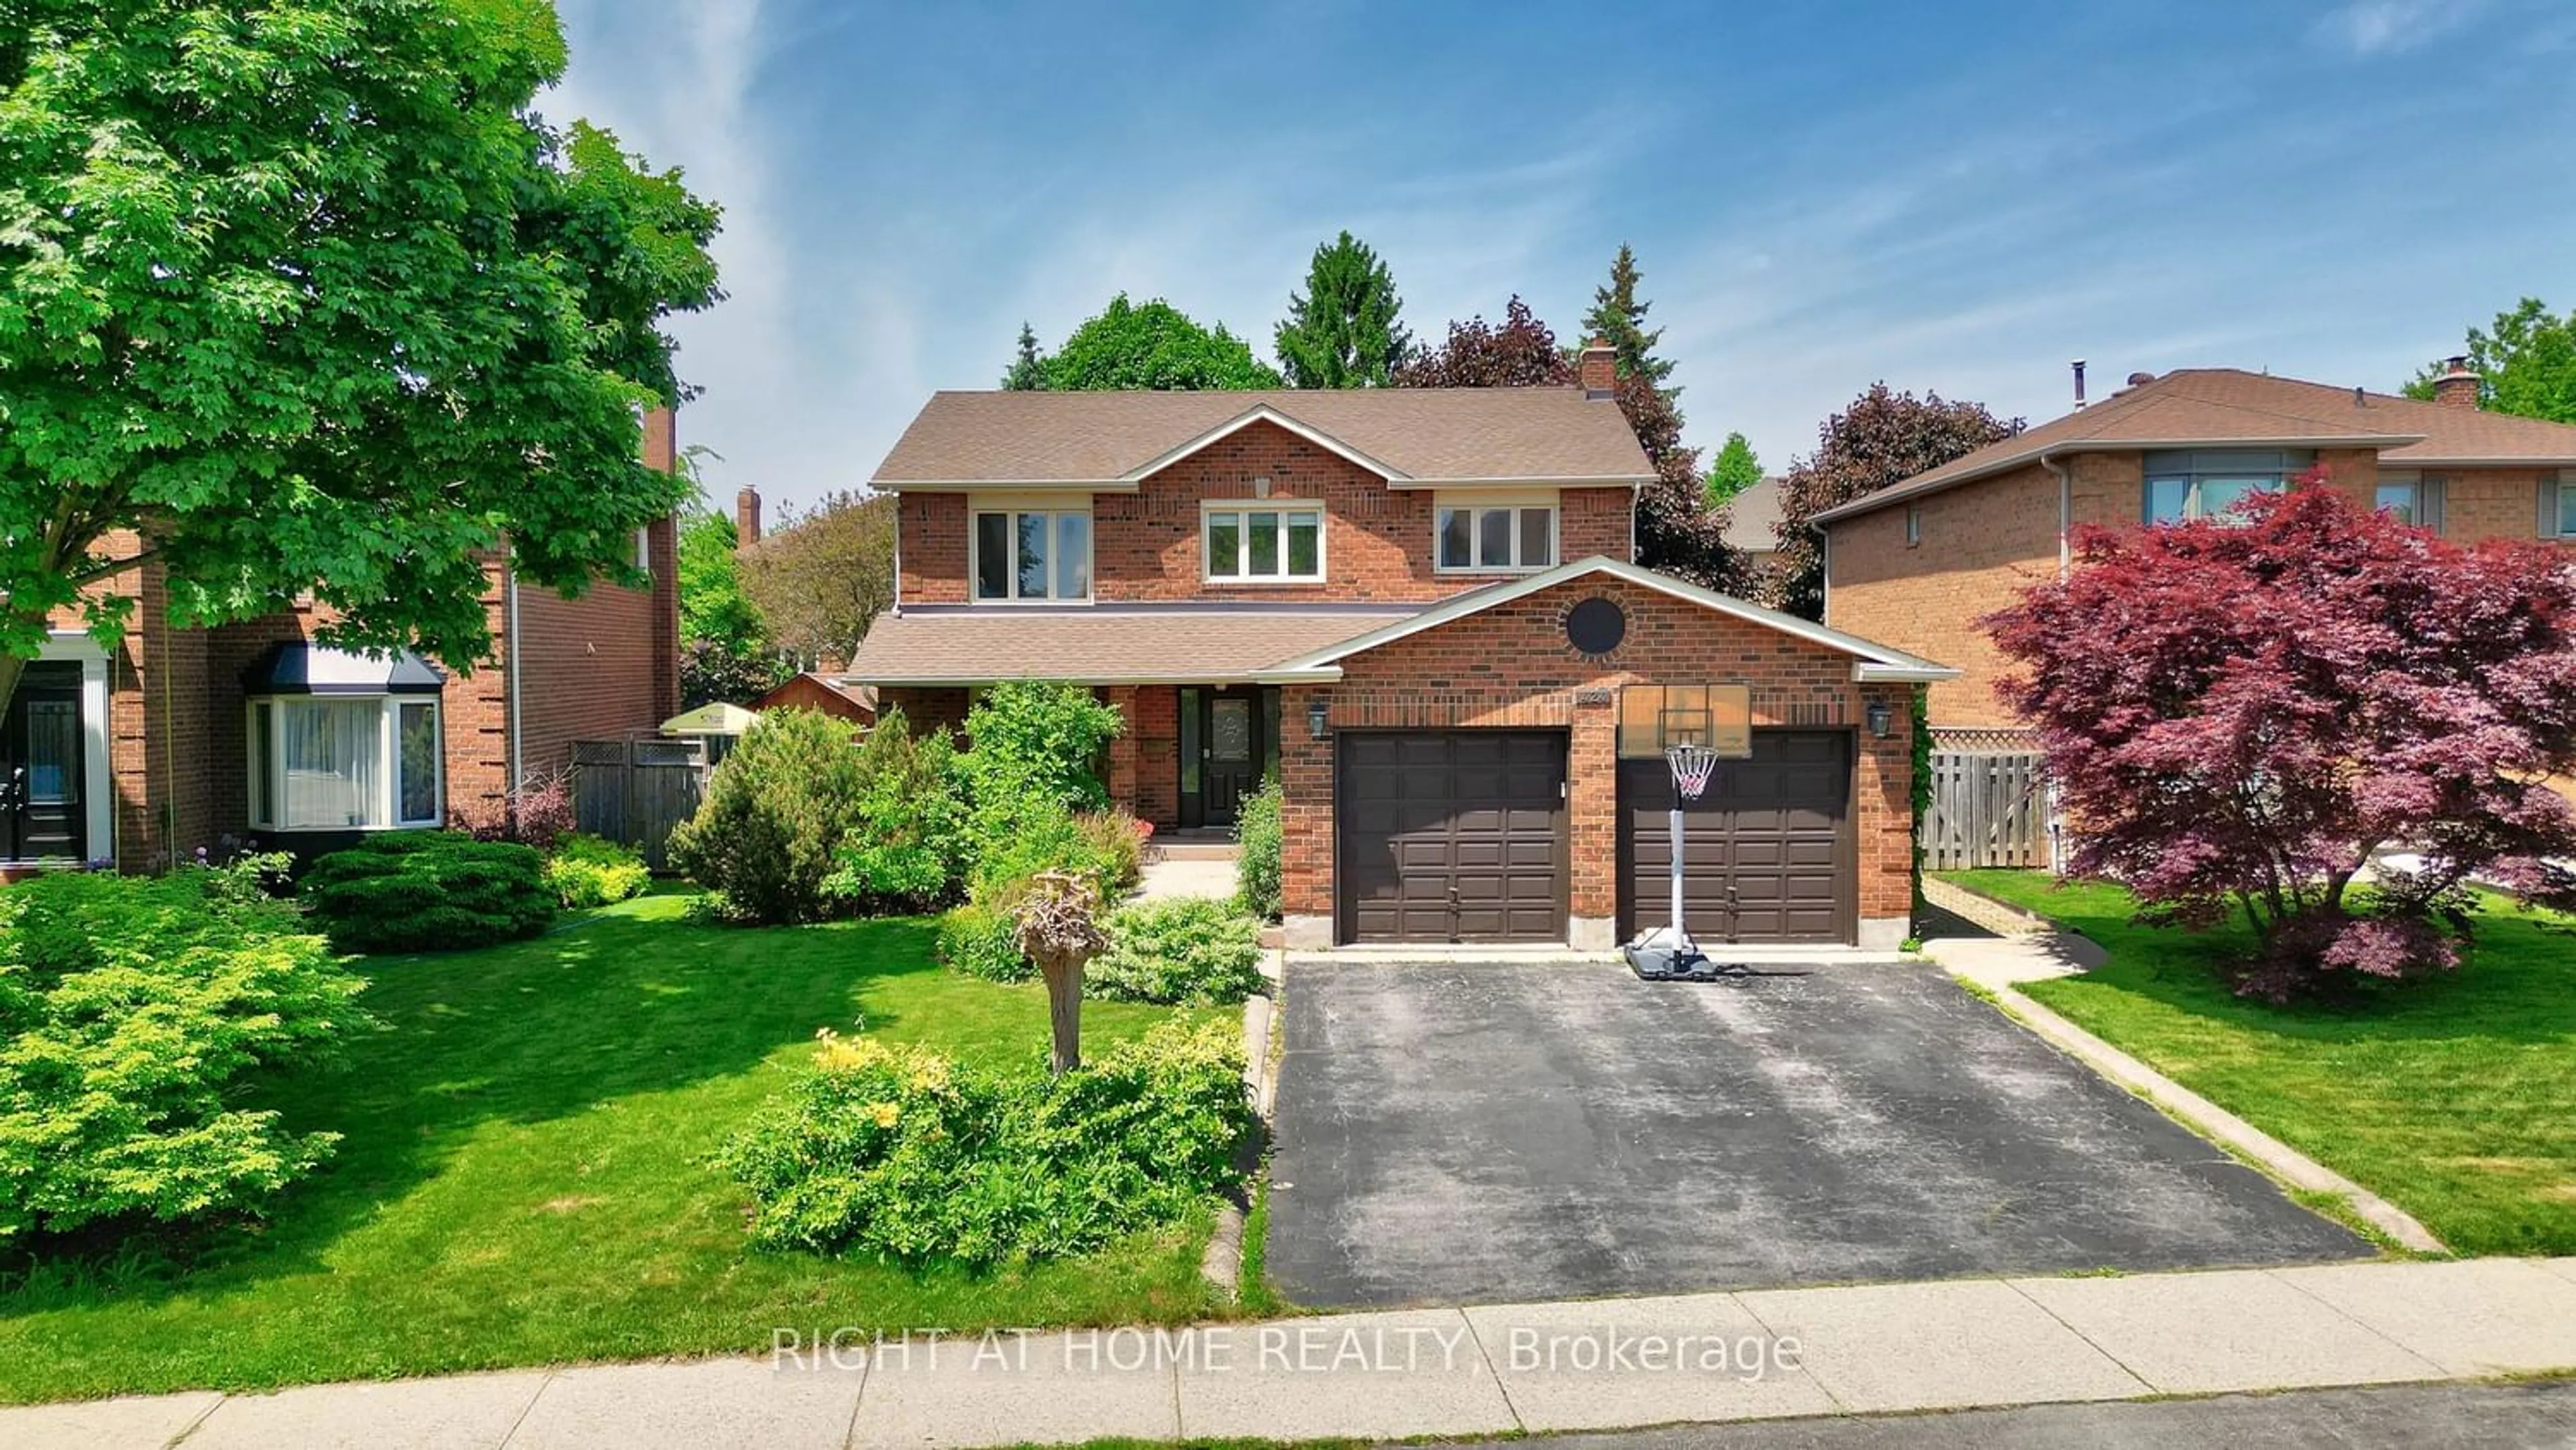 Home with brick exterior material for 424 Golden Oak Dr, Oakville Ontario L6H 3Y2